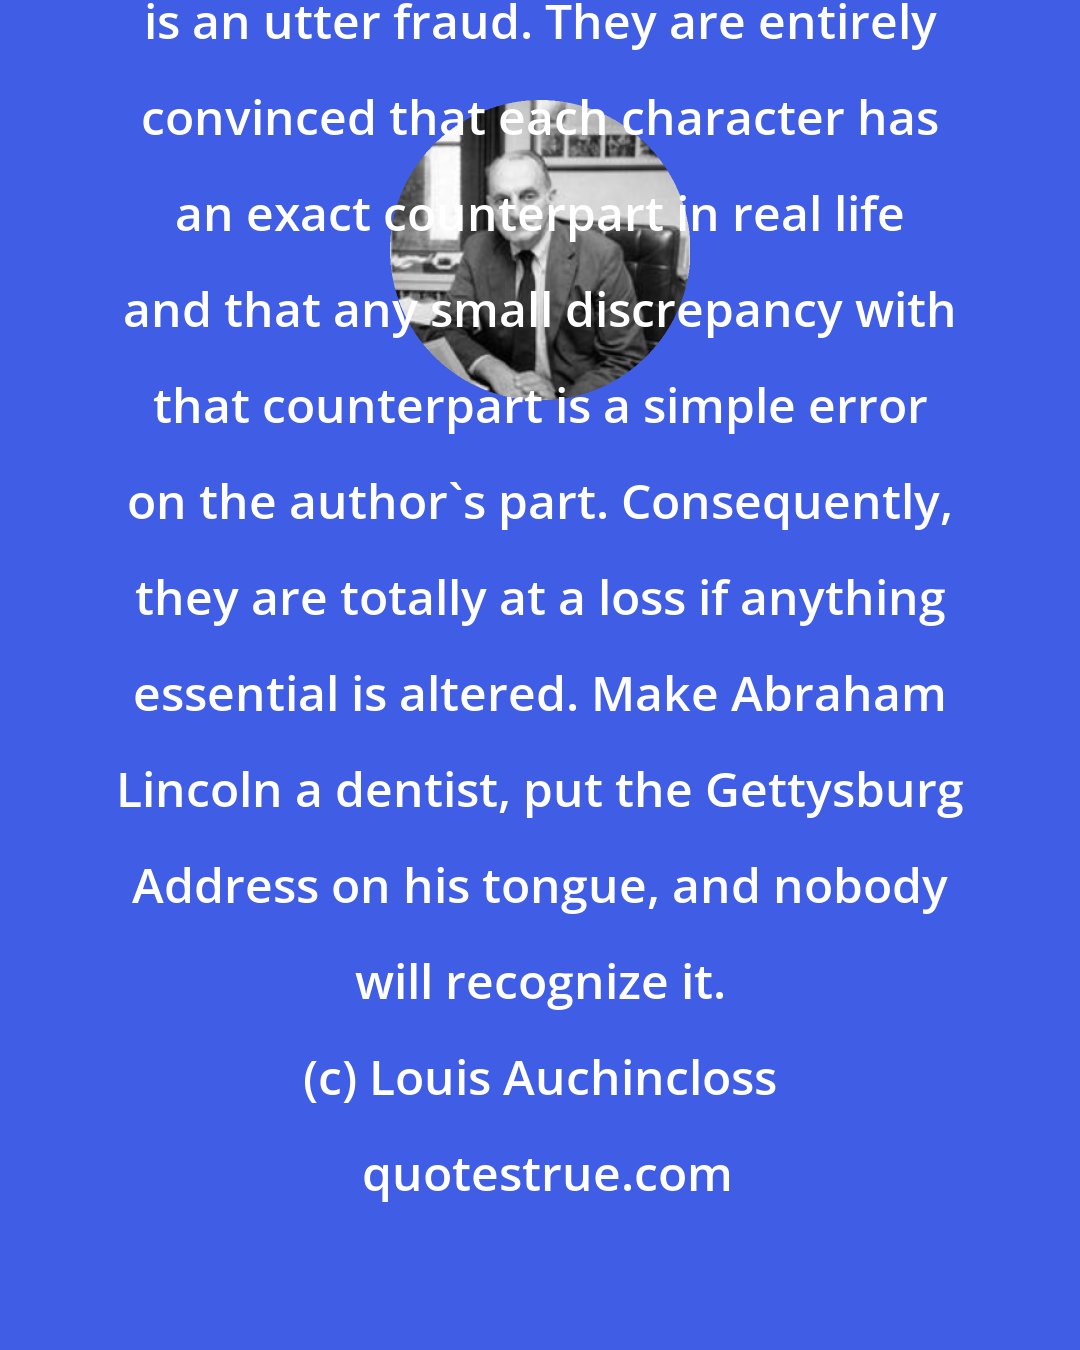 Louis Auchincloss: To most readers the word 'fiction' is an utter fraud. They are entirely convinced that each character has an exact counterpart in real life and that any small discrepancy with that counterpart is a simple error on the author's part. Consequently, they are totally at a loss if anything essential is altered. Make Abraham Lincoln a dentist, put the Gettysburg Address on his tongue, and nobody will recognize it.